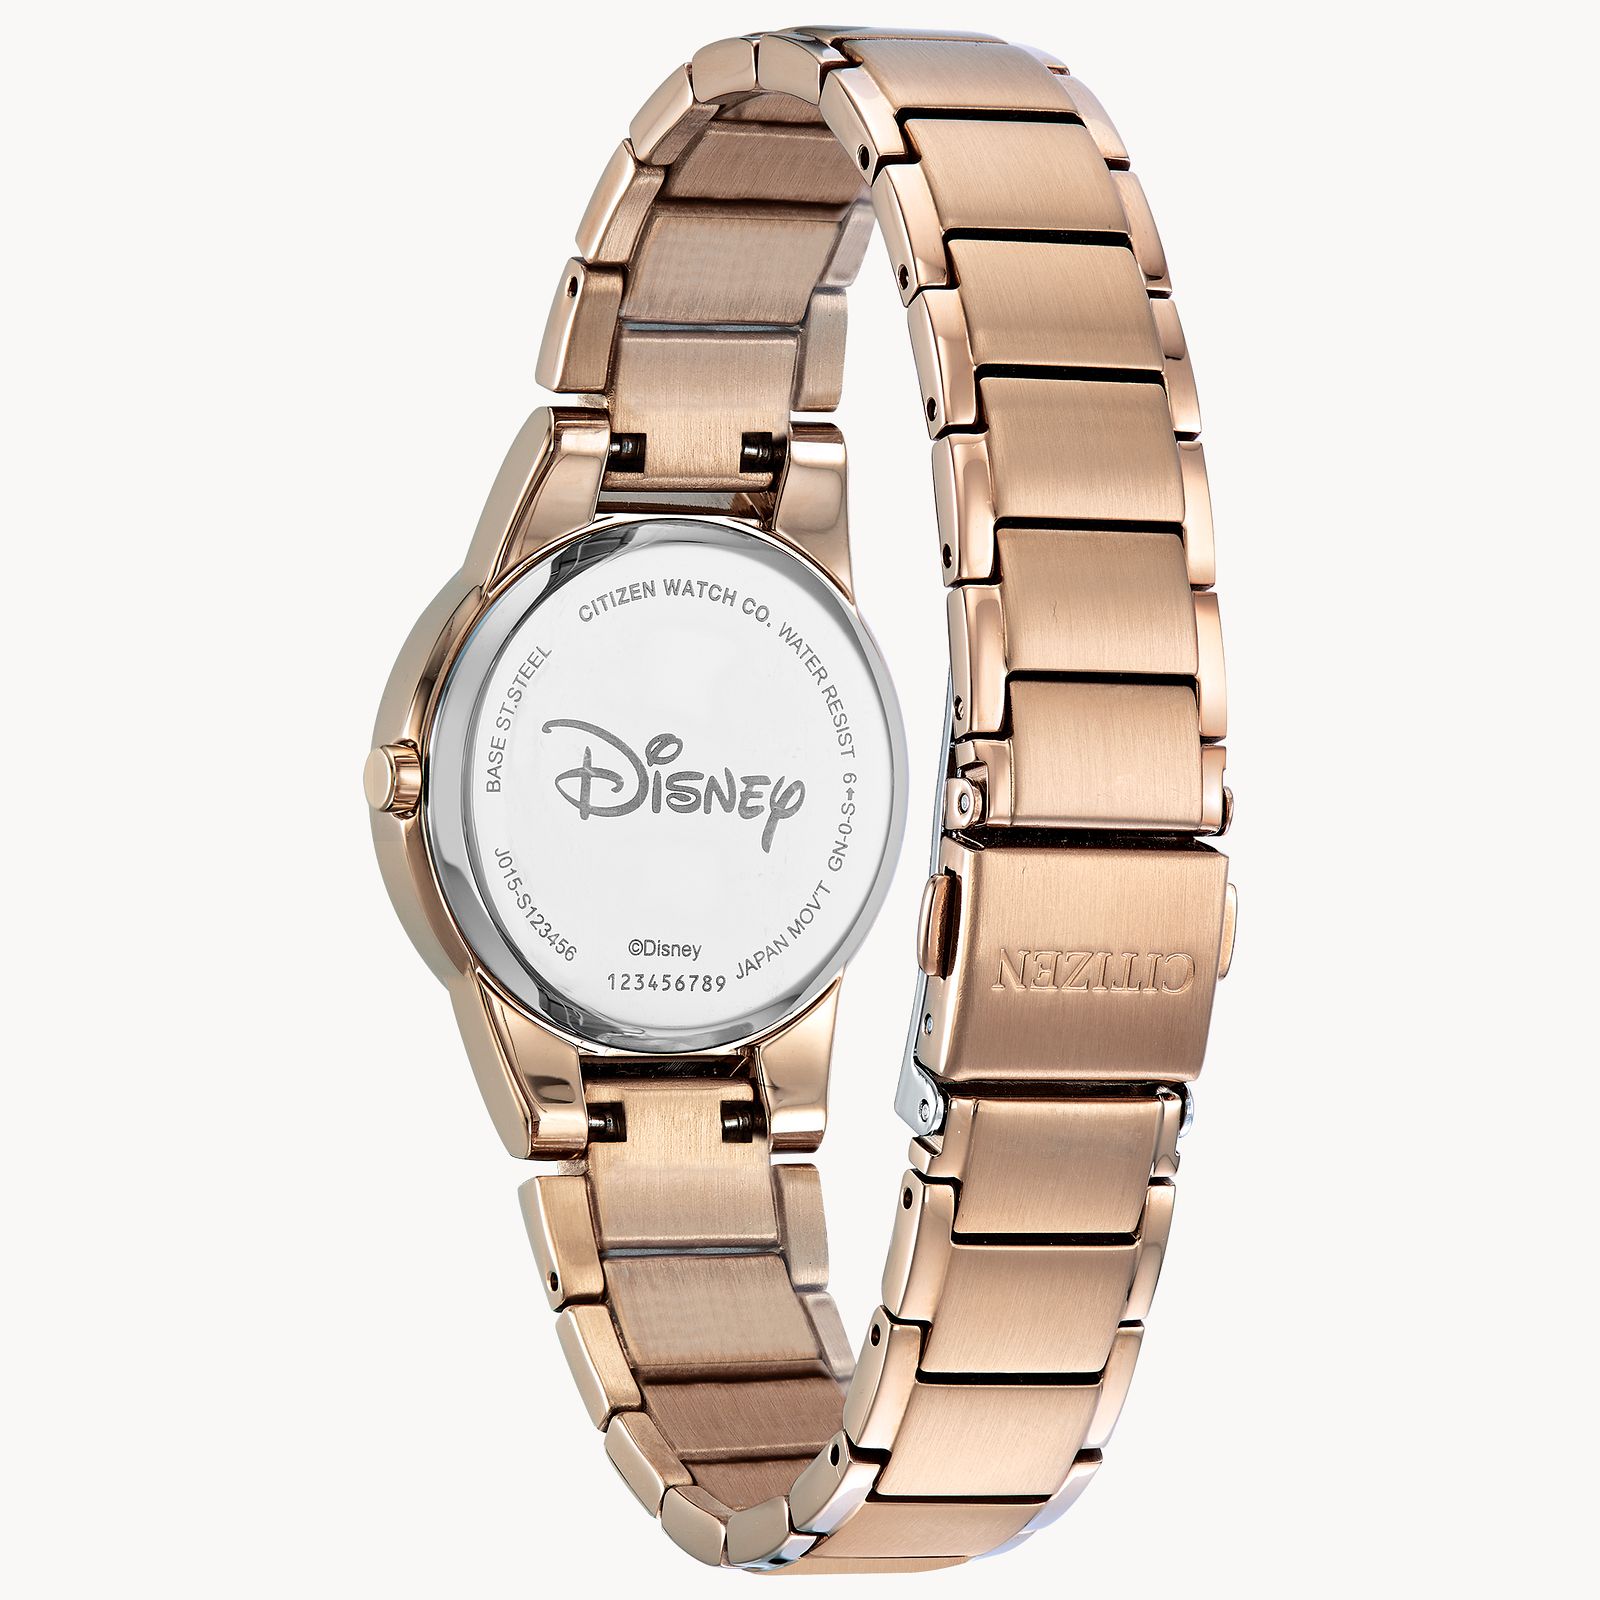 Citizen Diamond Mickey Mouse Lady's Watch | Harry Ritchie's